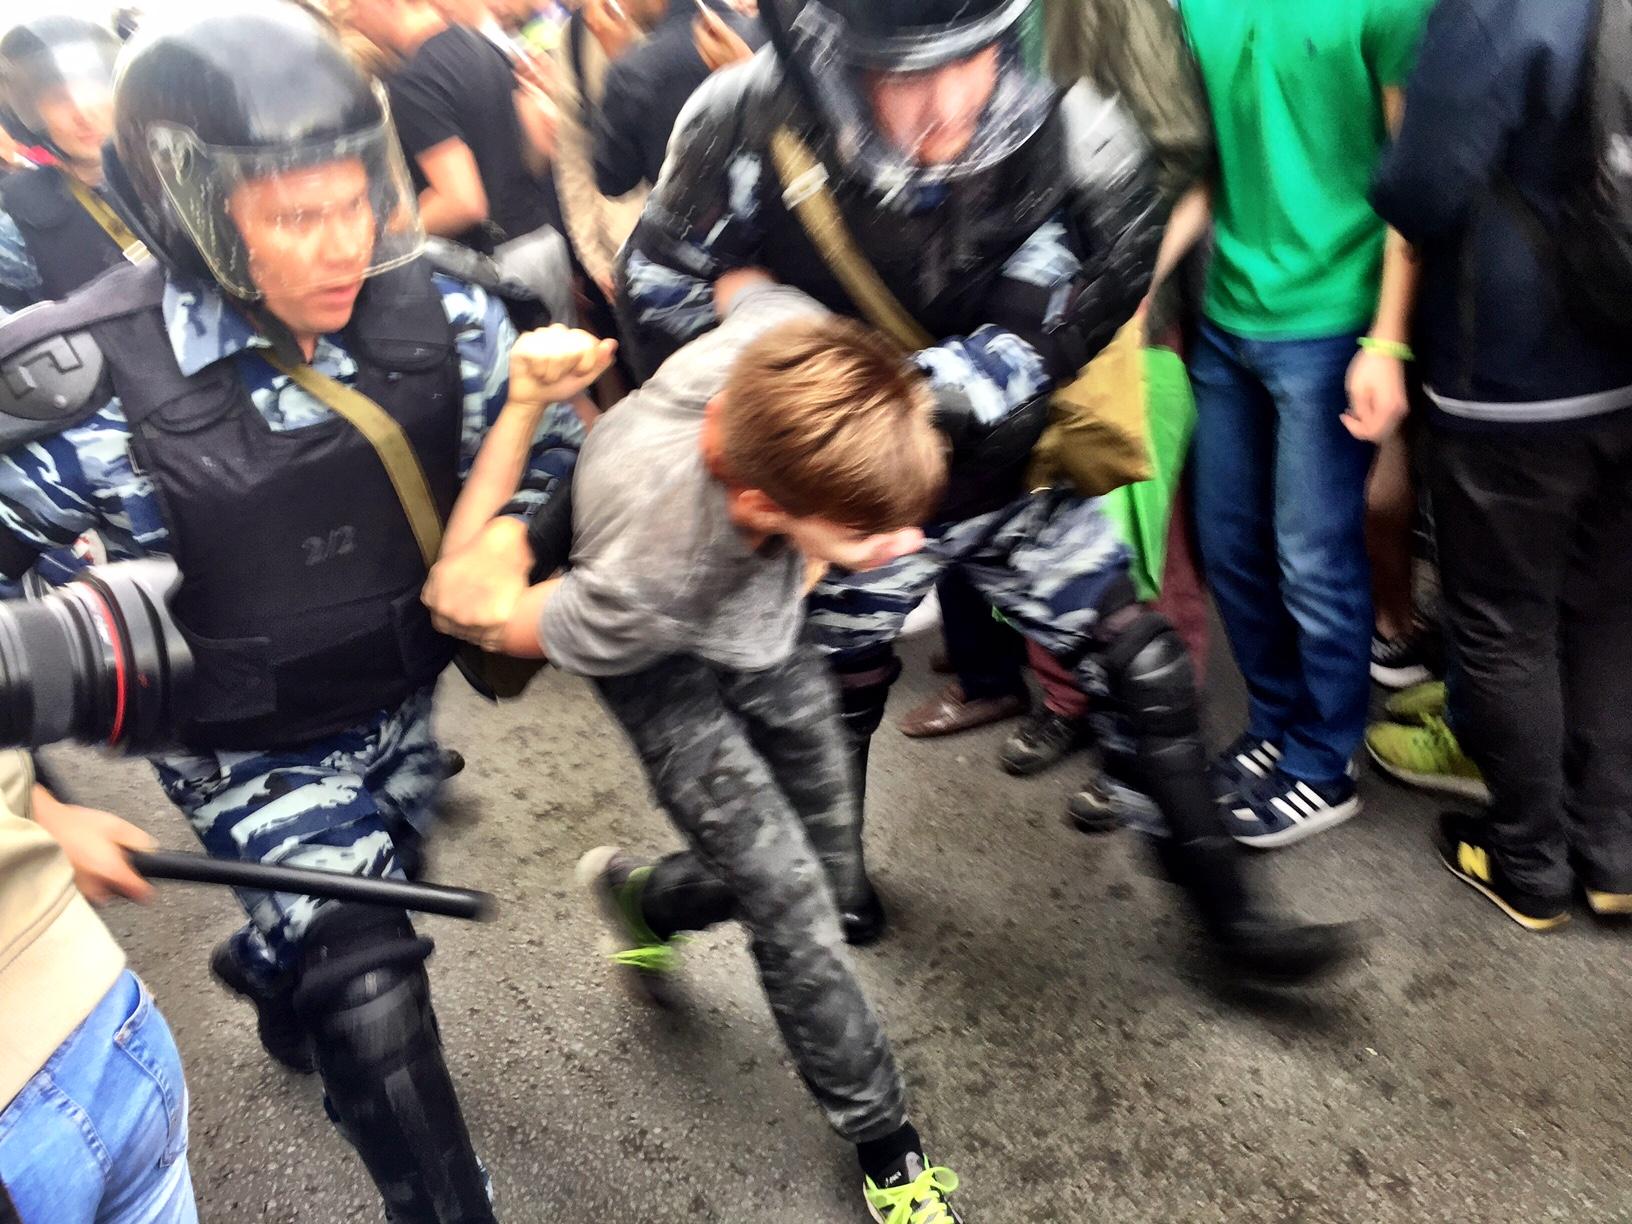 A young protester in Russia being arrested by police.